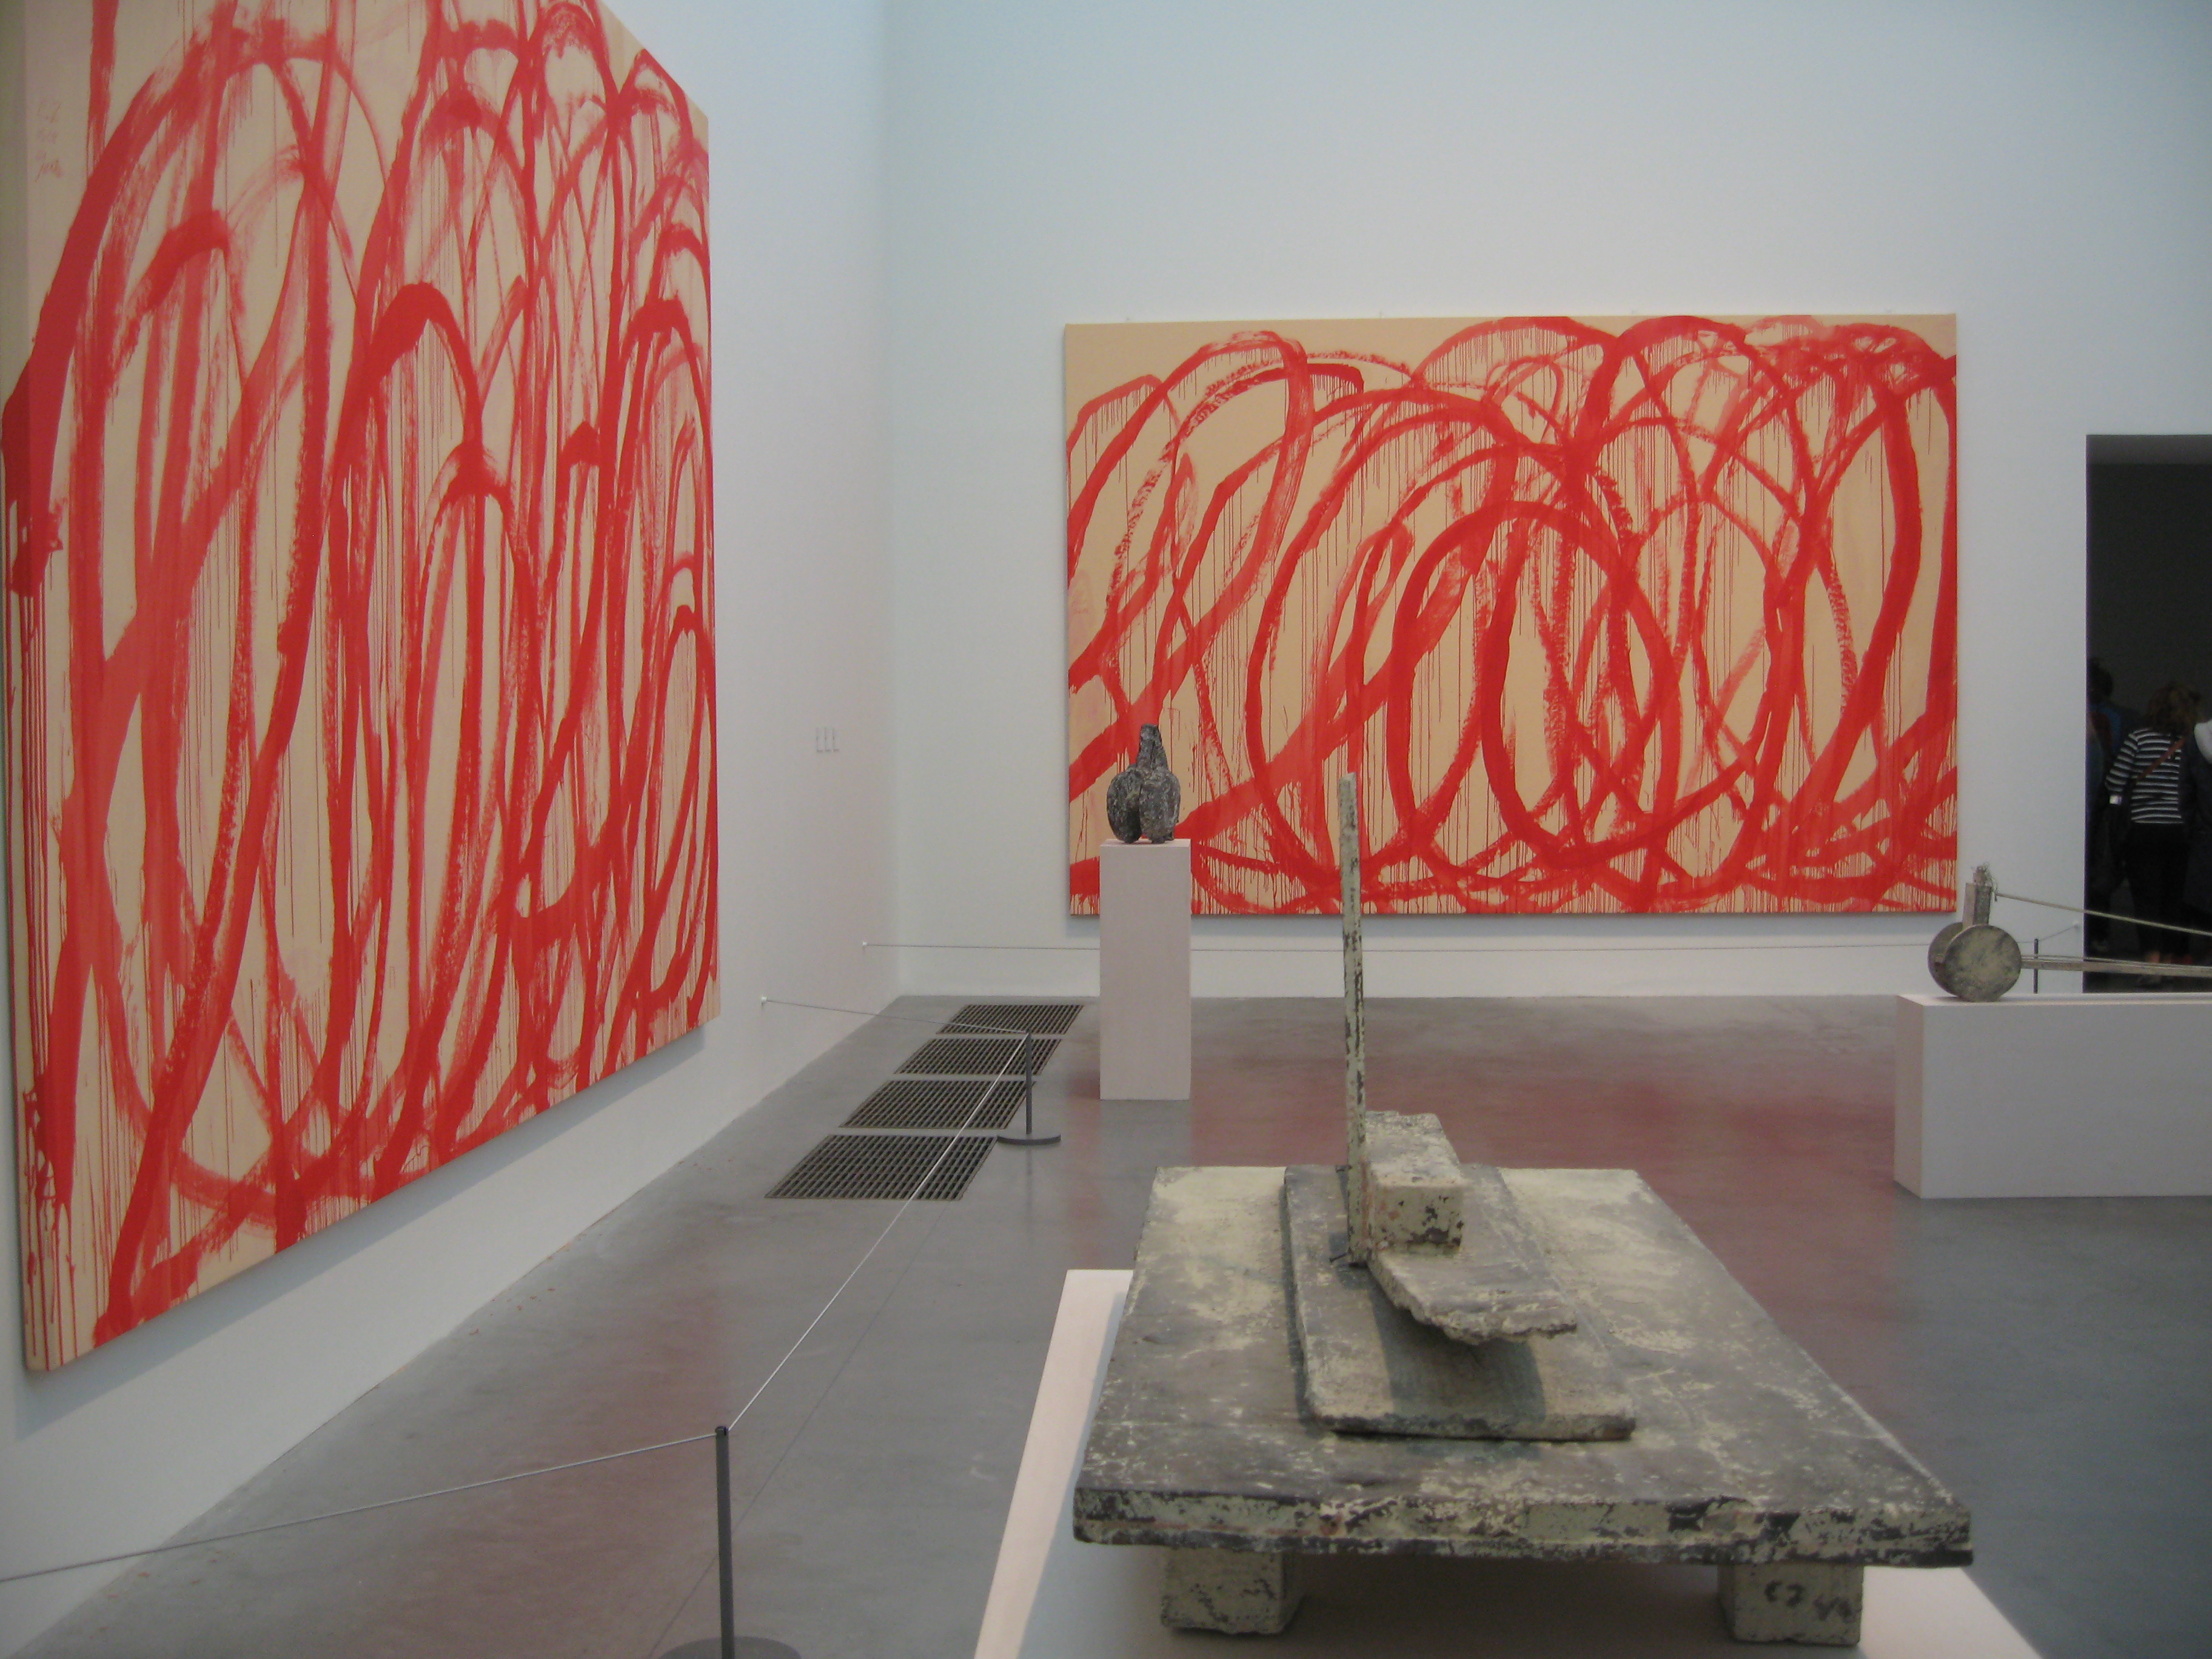 Cy Twombly at the Tate Modern in London. Photo by me.